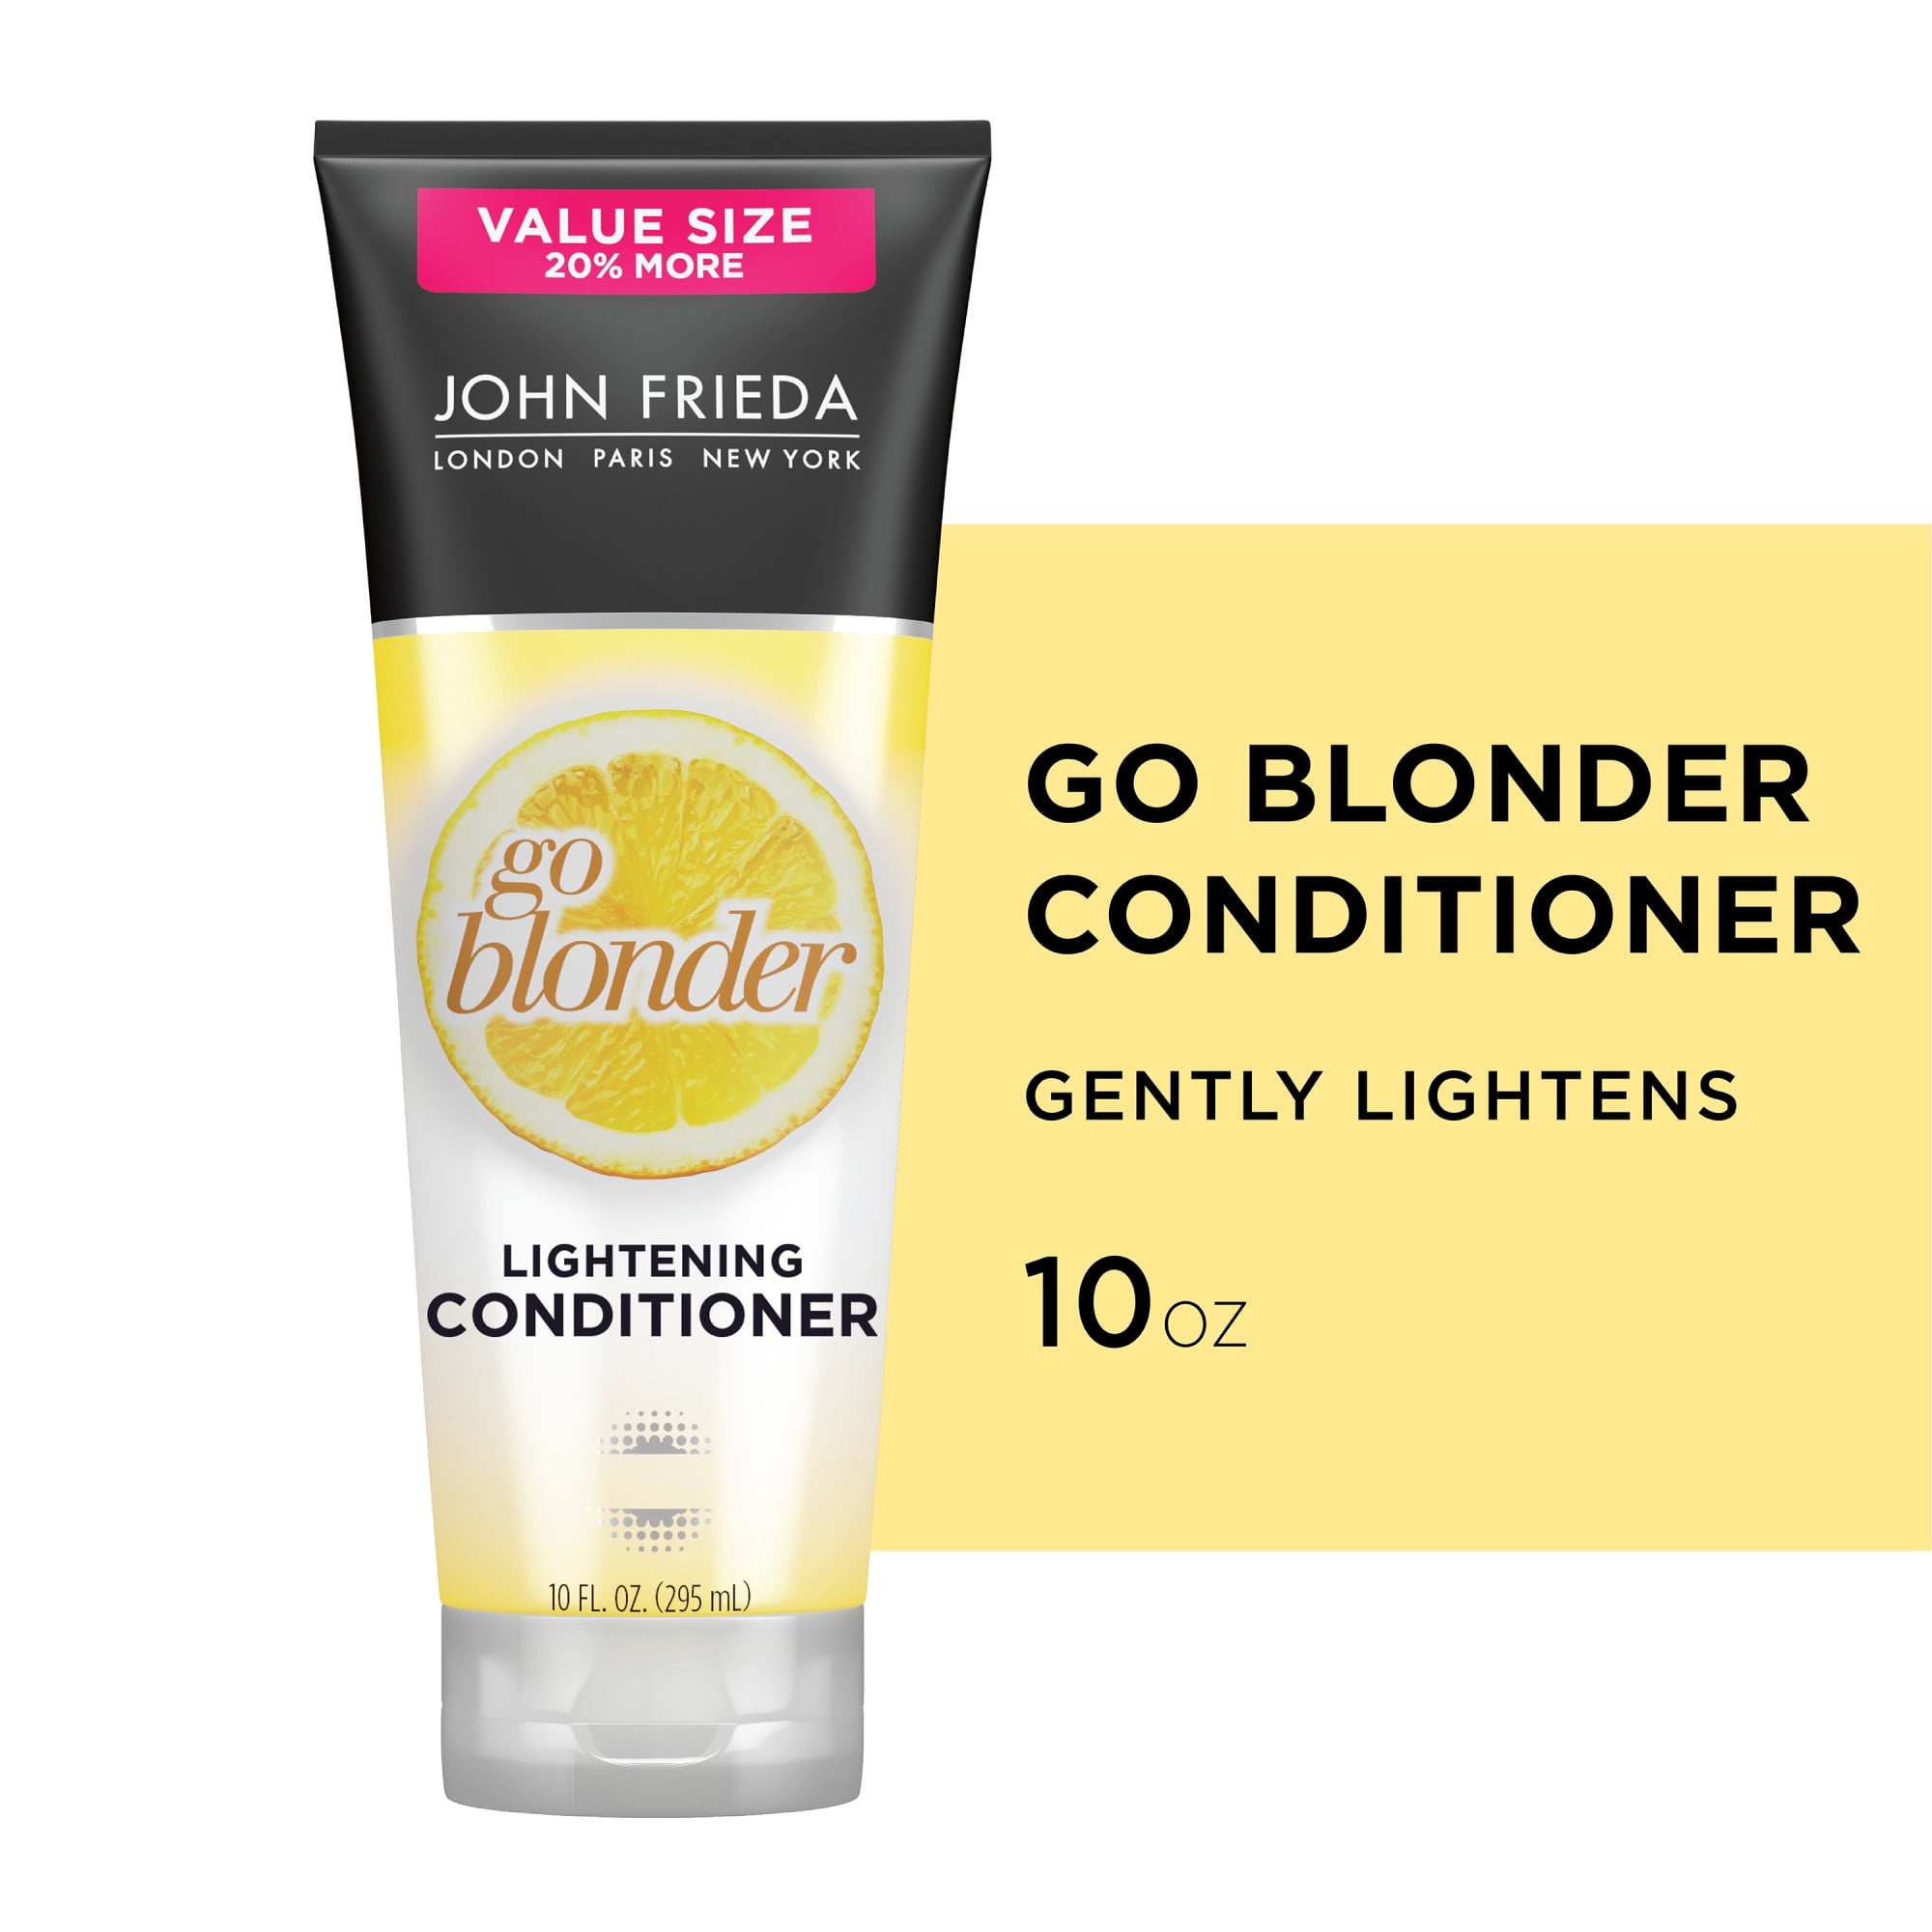 John Frieda Go Blonder Lightening Conditioner, Salon Quality Conditioner and Tone Enhancer for Color Treated and Natural Blonde, Maintain Healthy Hair, 10 Ounce